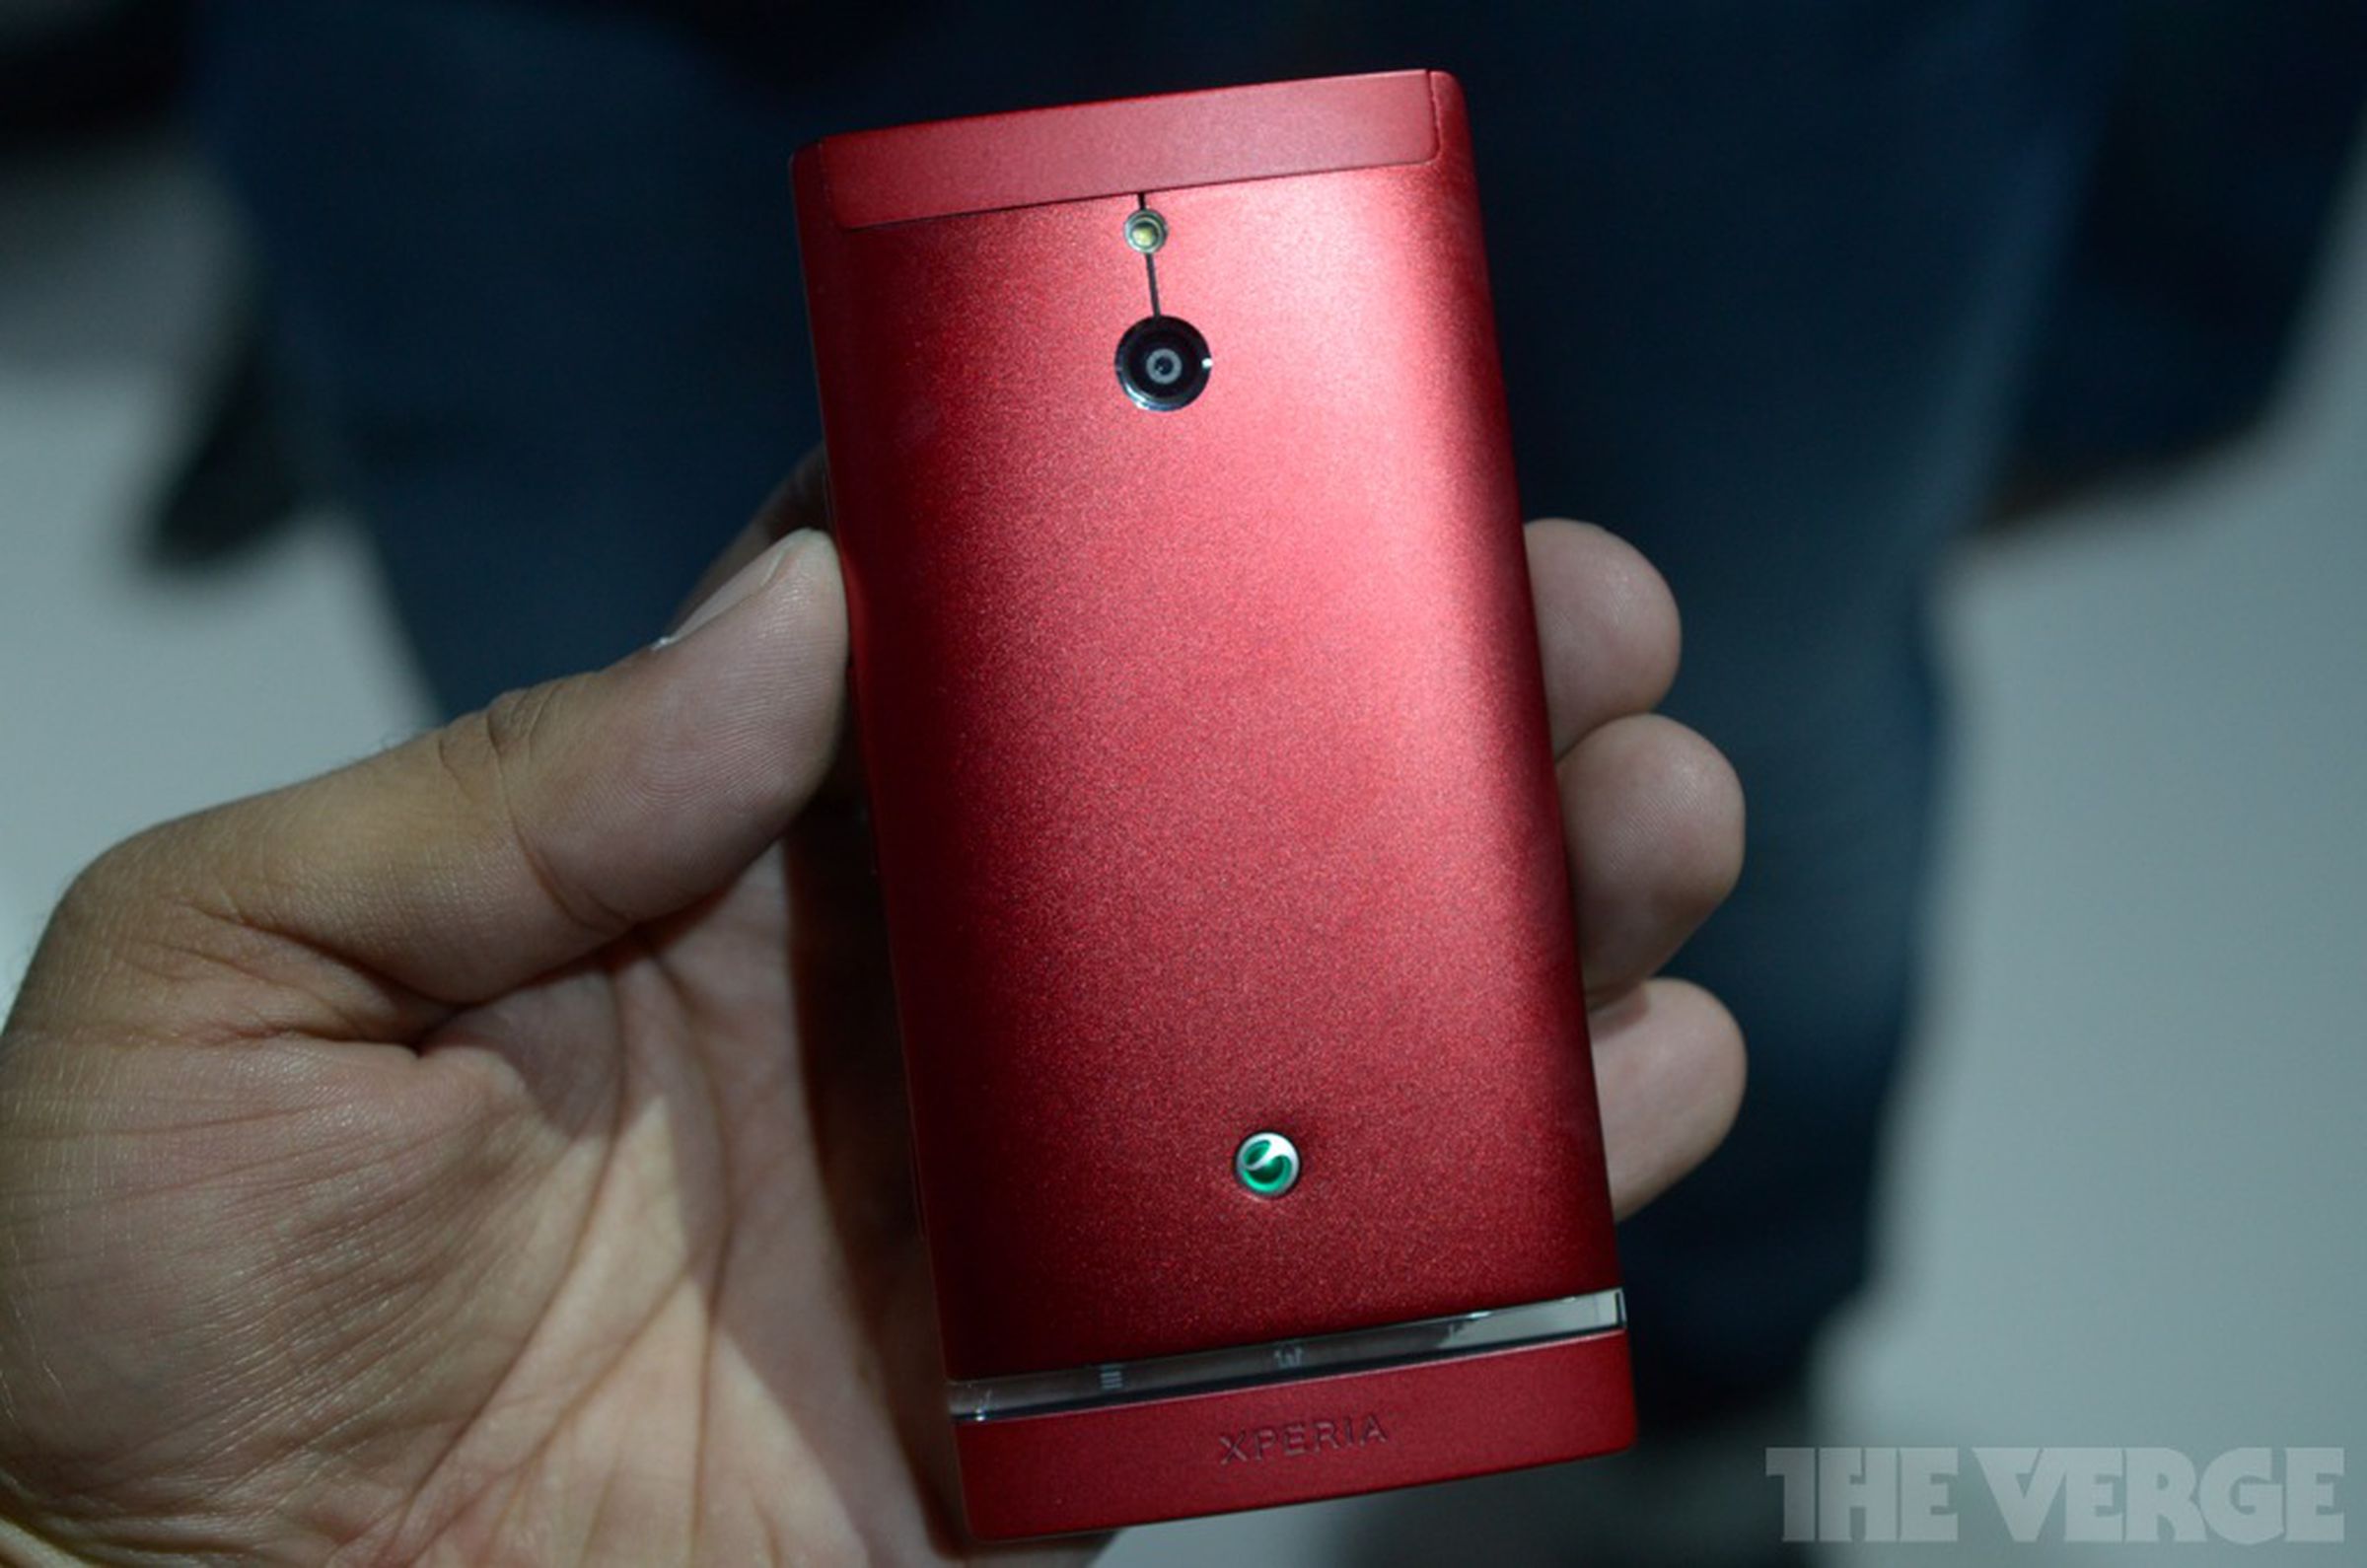 Sony Xperia P first hands-on!